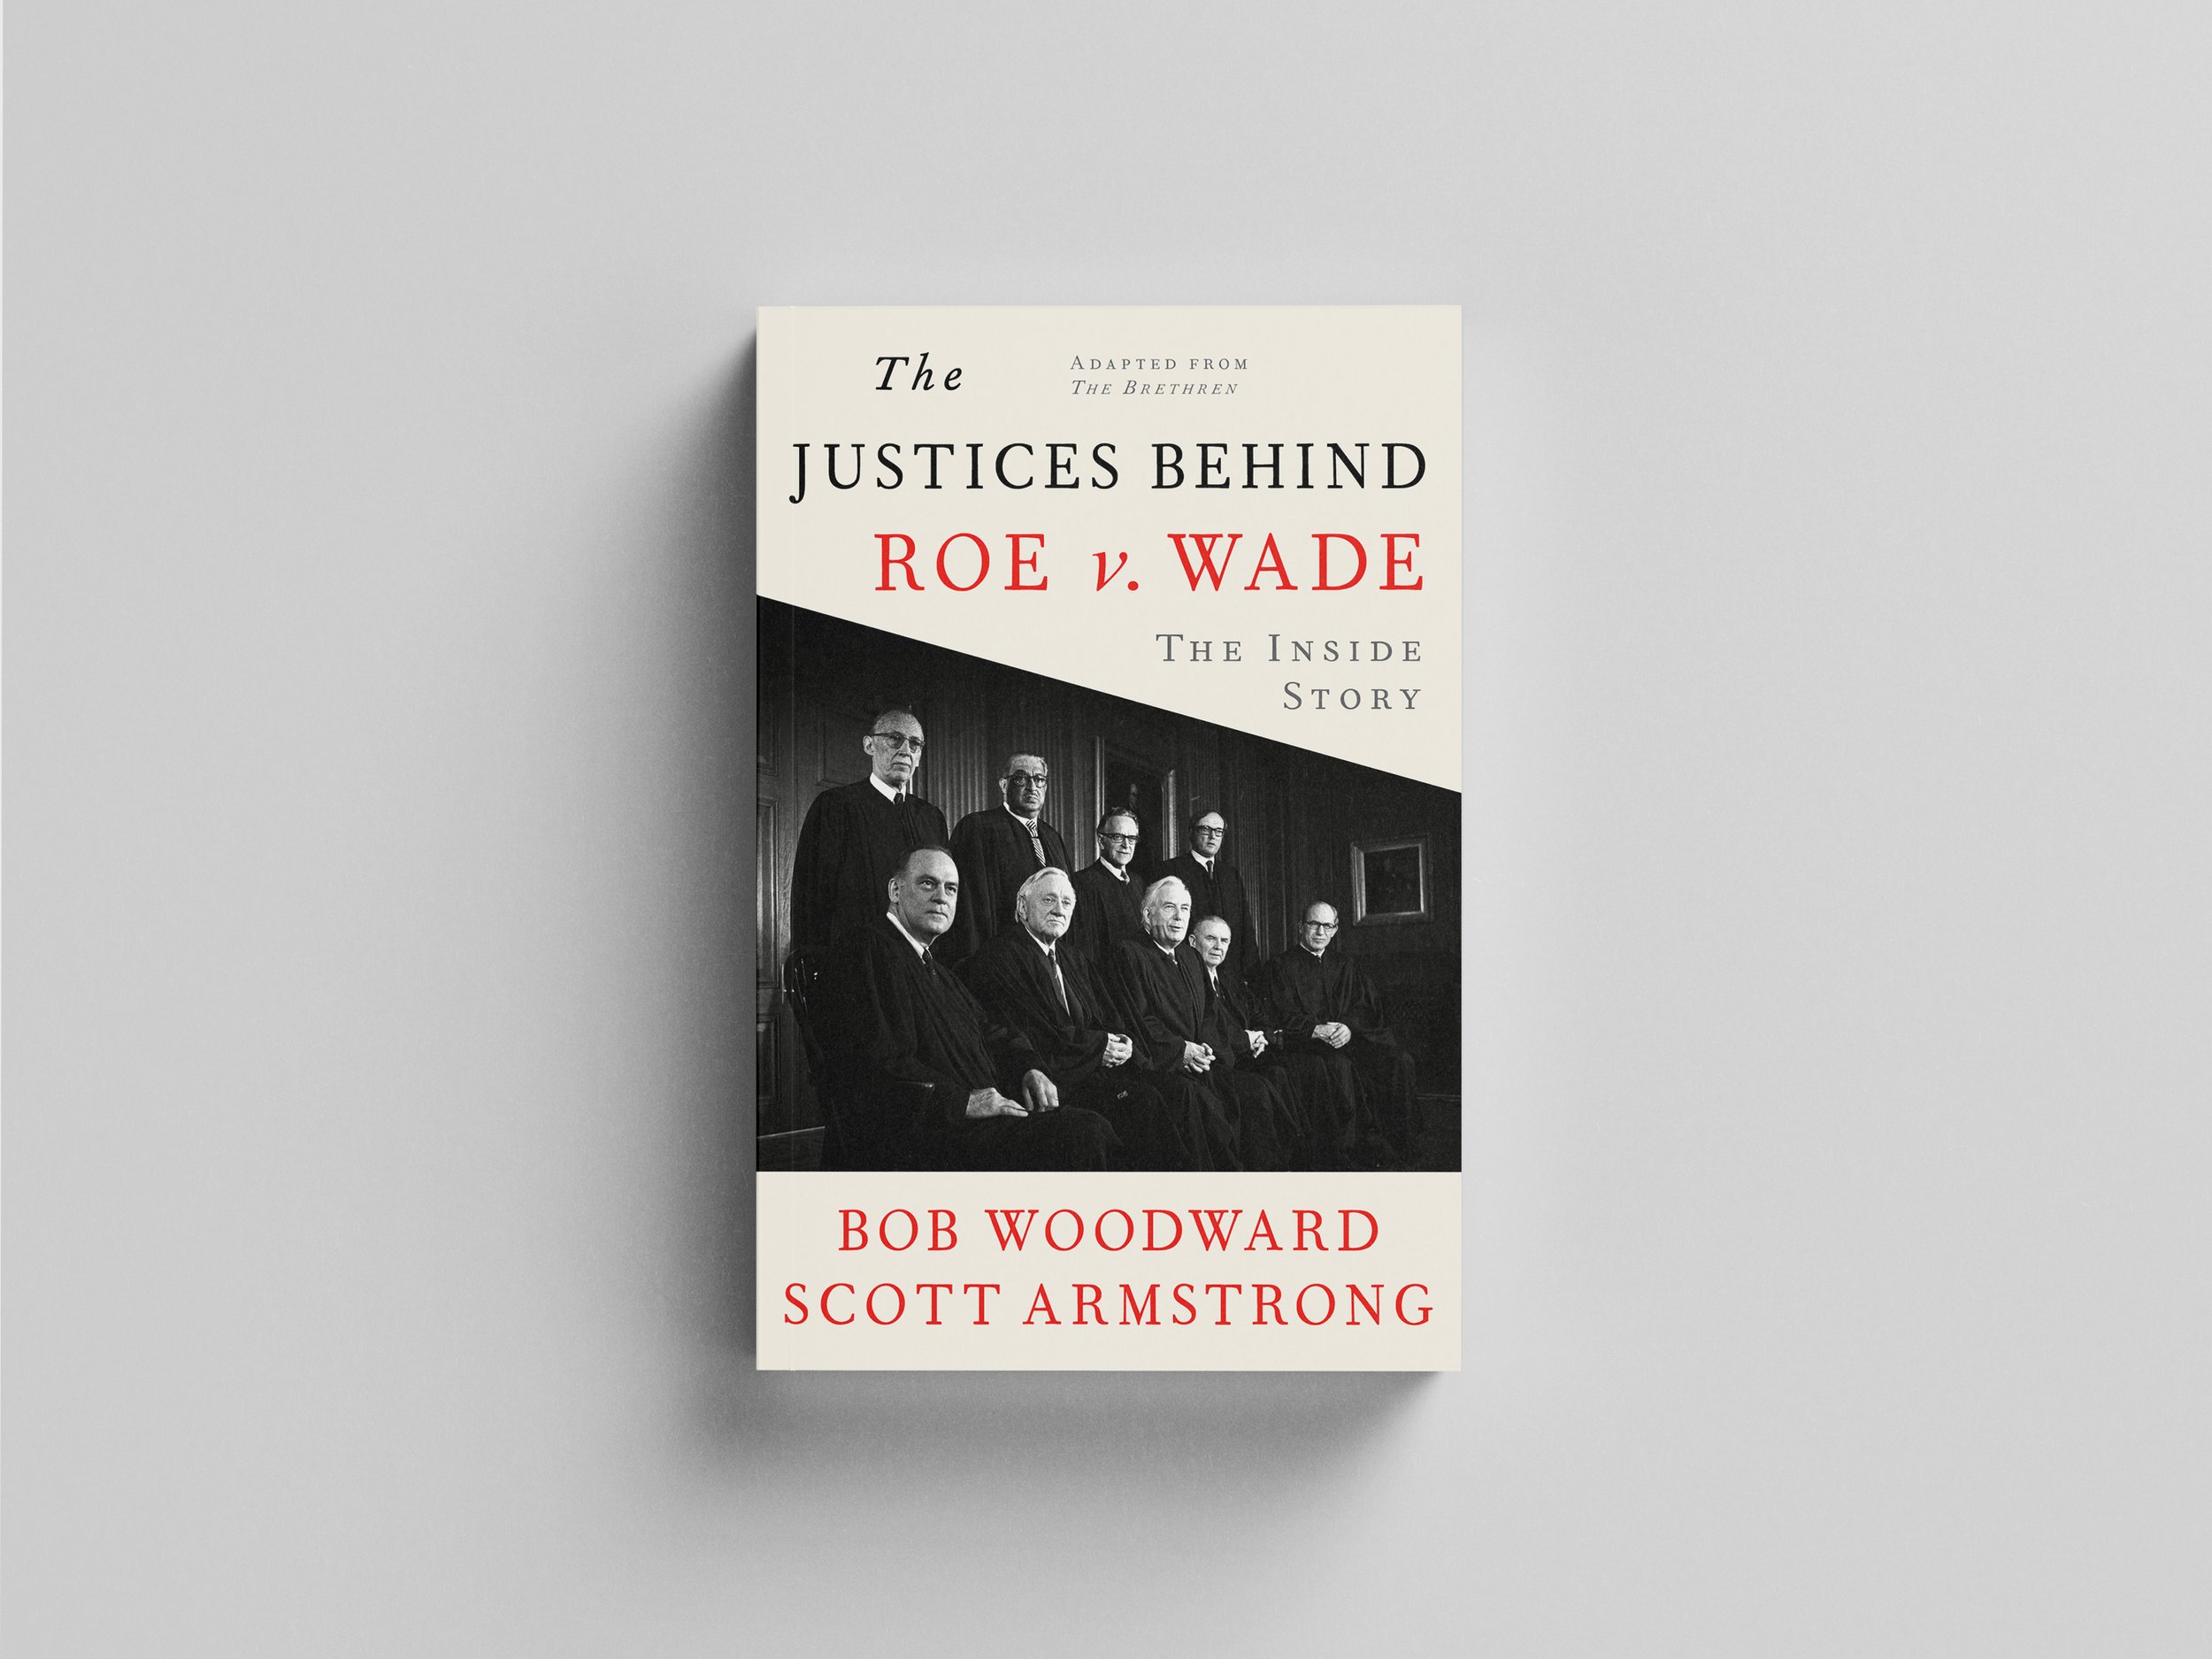 The Justices Behind Roe v. Wade